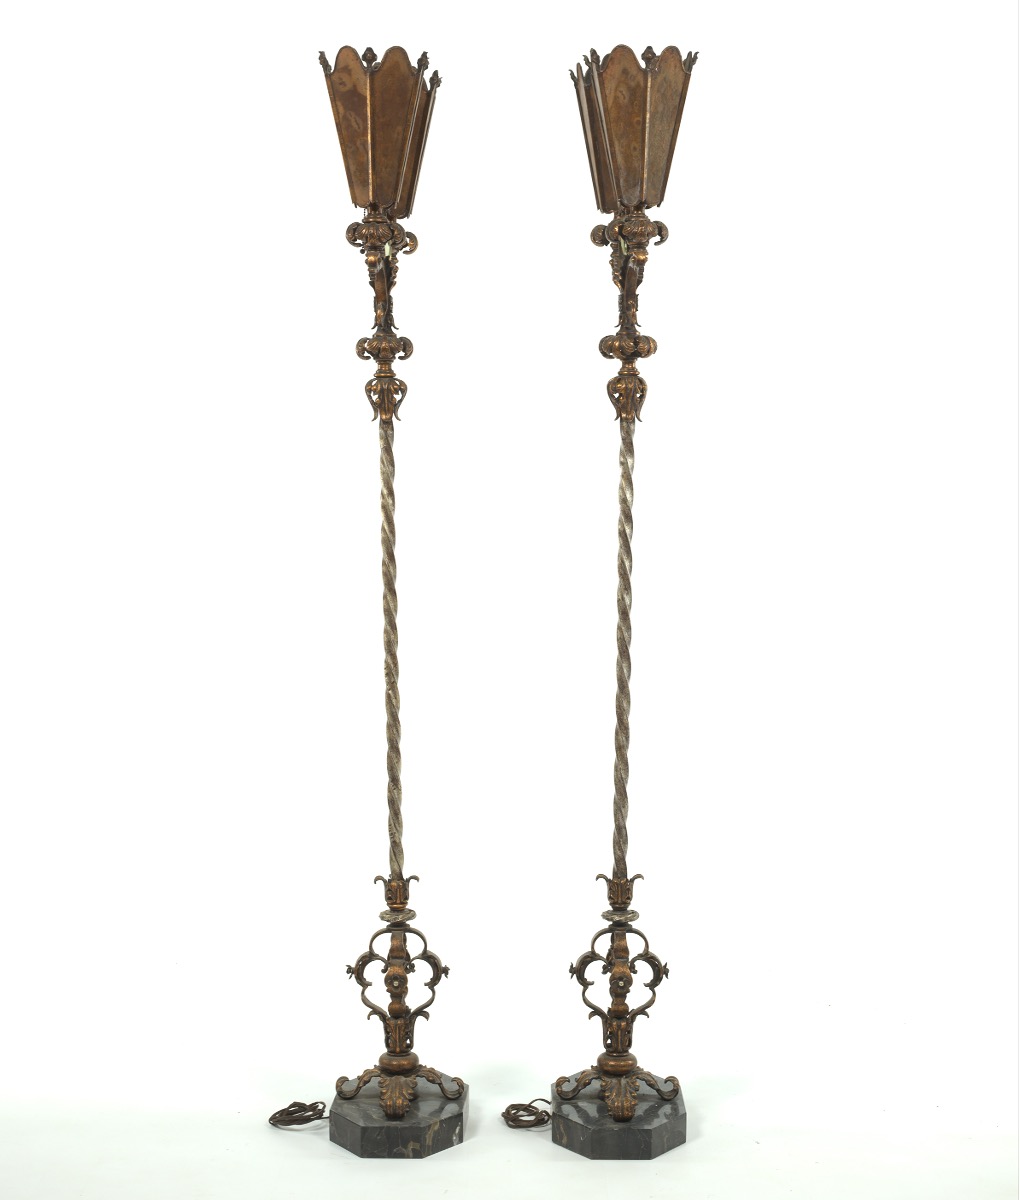 Pair of Baroque Style Wrought Iron Torchieres, ca. 1900-1920 - Image 4 of 7